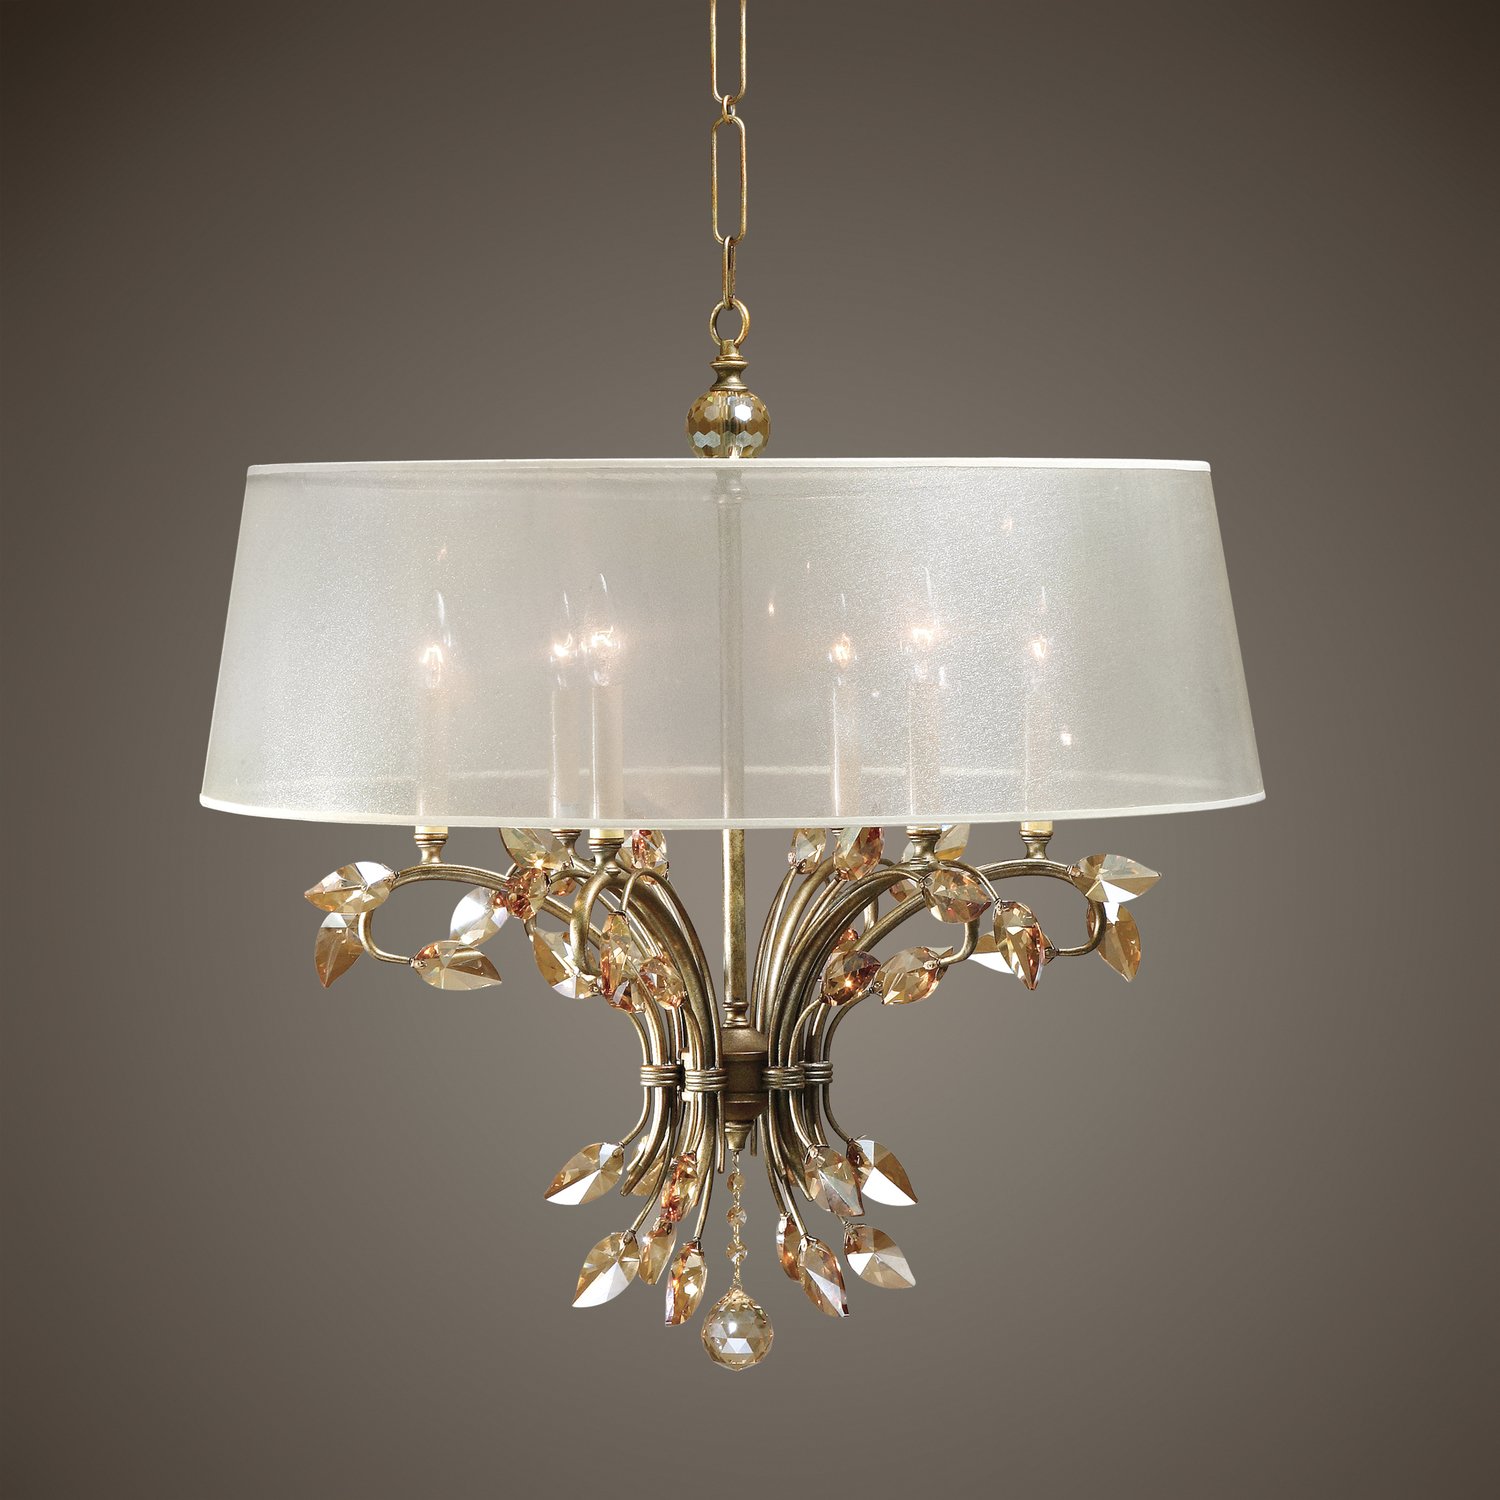 candelabra light fixture Uttermost Chandeliers Burnished Gold Metal With Golden Teak Crystal Leaves And A Silken Champagne Sheer Fabric Shade. NA